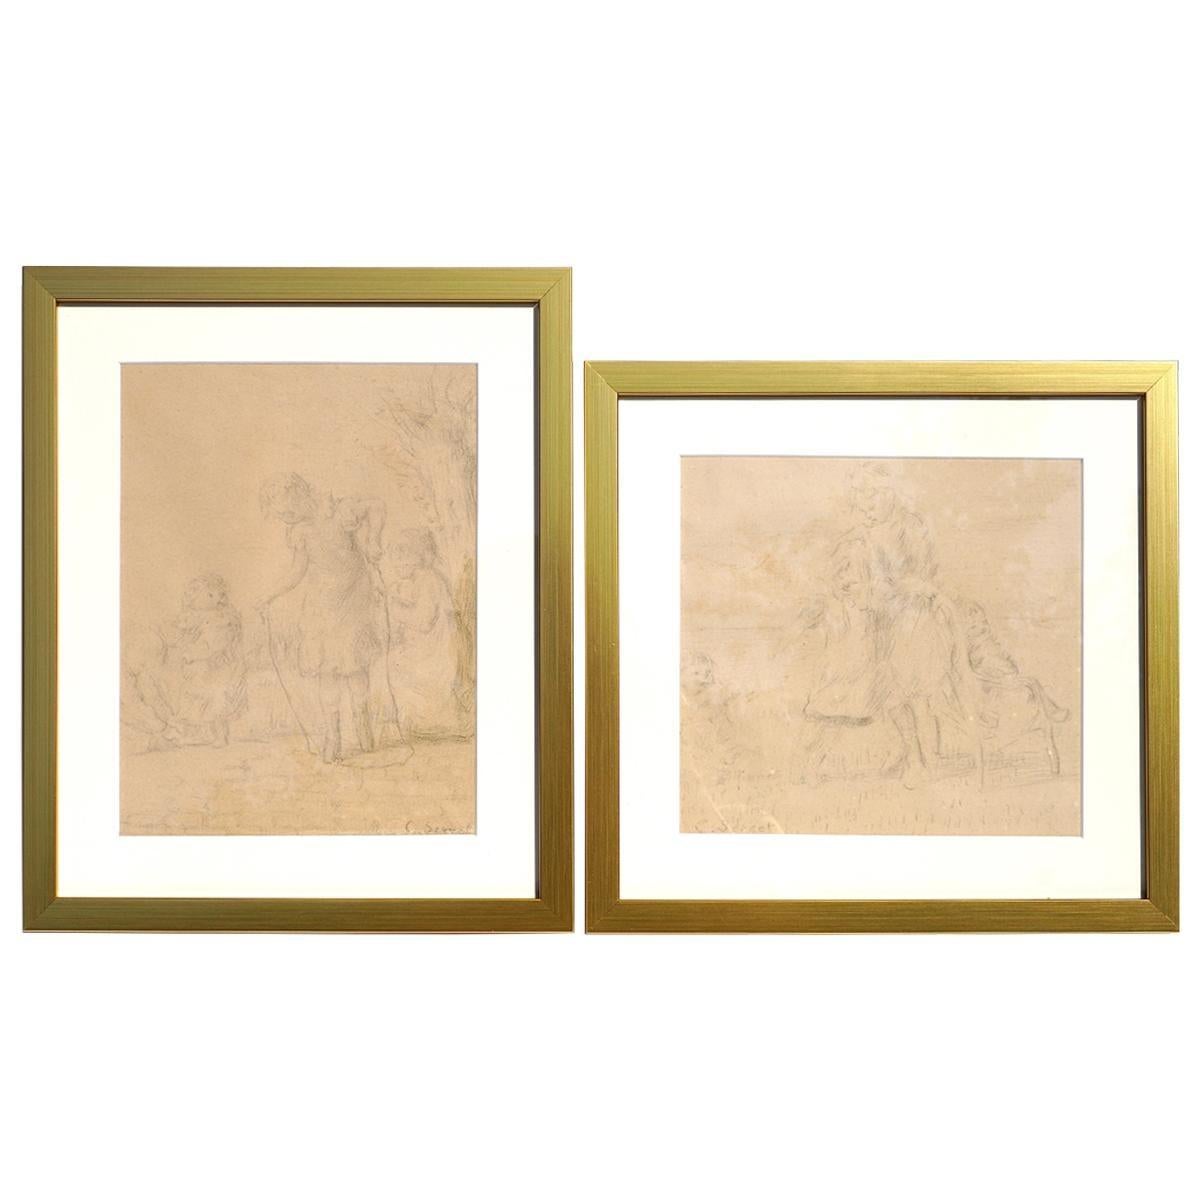 Unknown Portrait - Charles Emmanuel Serret 'FR 1824-1900' Two Drawings of Children Playing